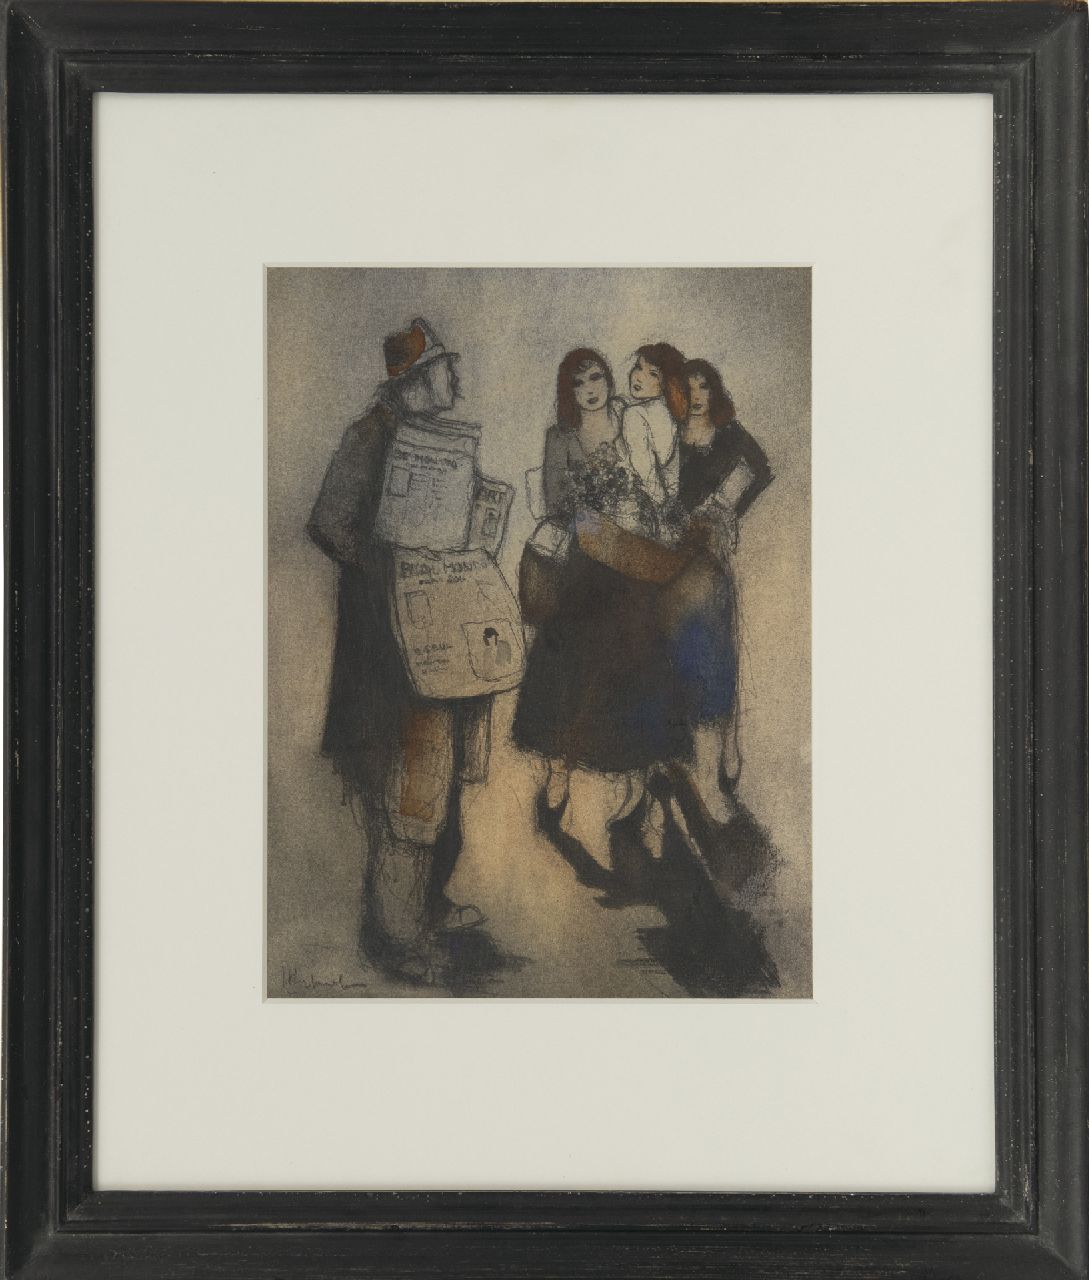 Rijlaarsdam J.  | Jan Rijlaarsdam, A newspaper seller and flower girls, Paris, black chalk and watercolour on paper 26.4 x 19.9 cm, signed l.l.